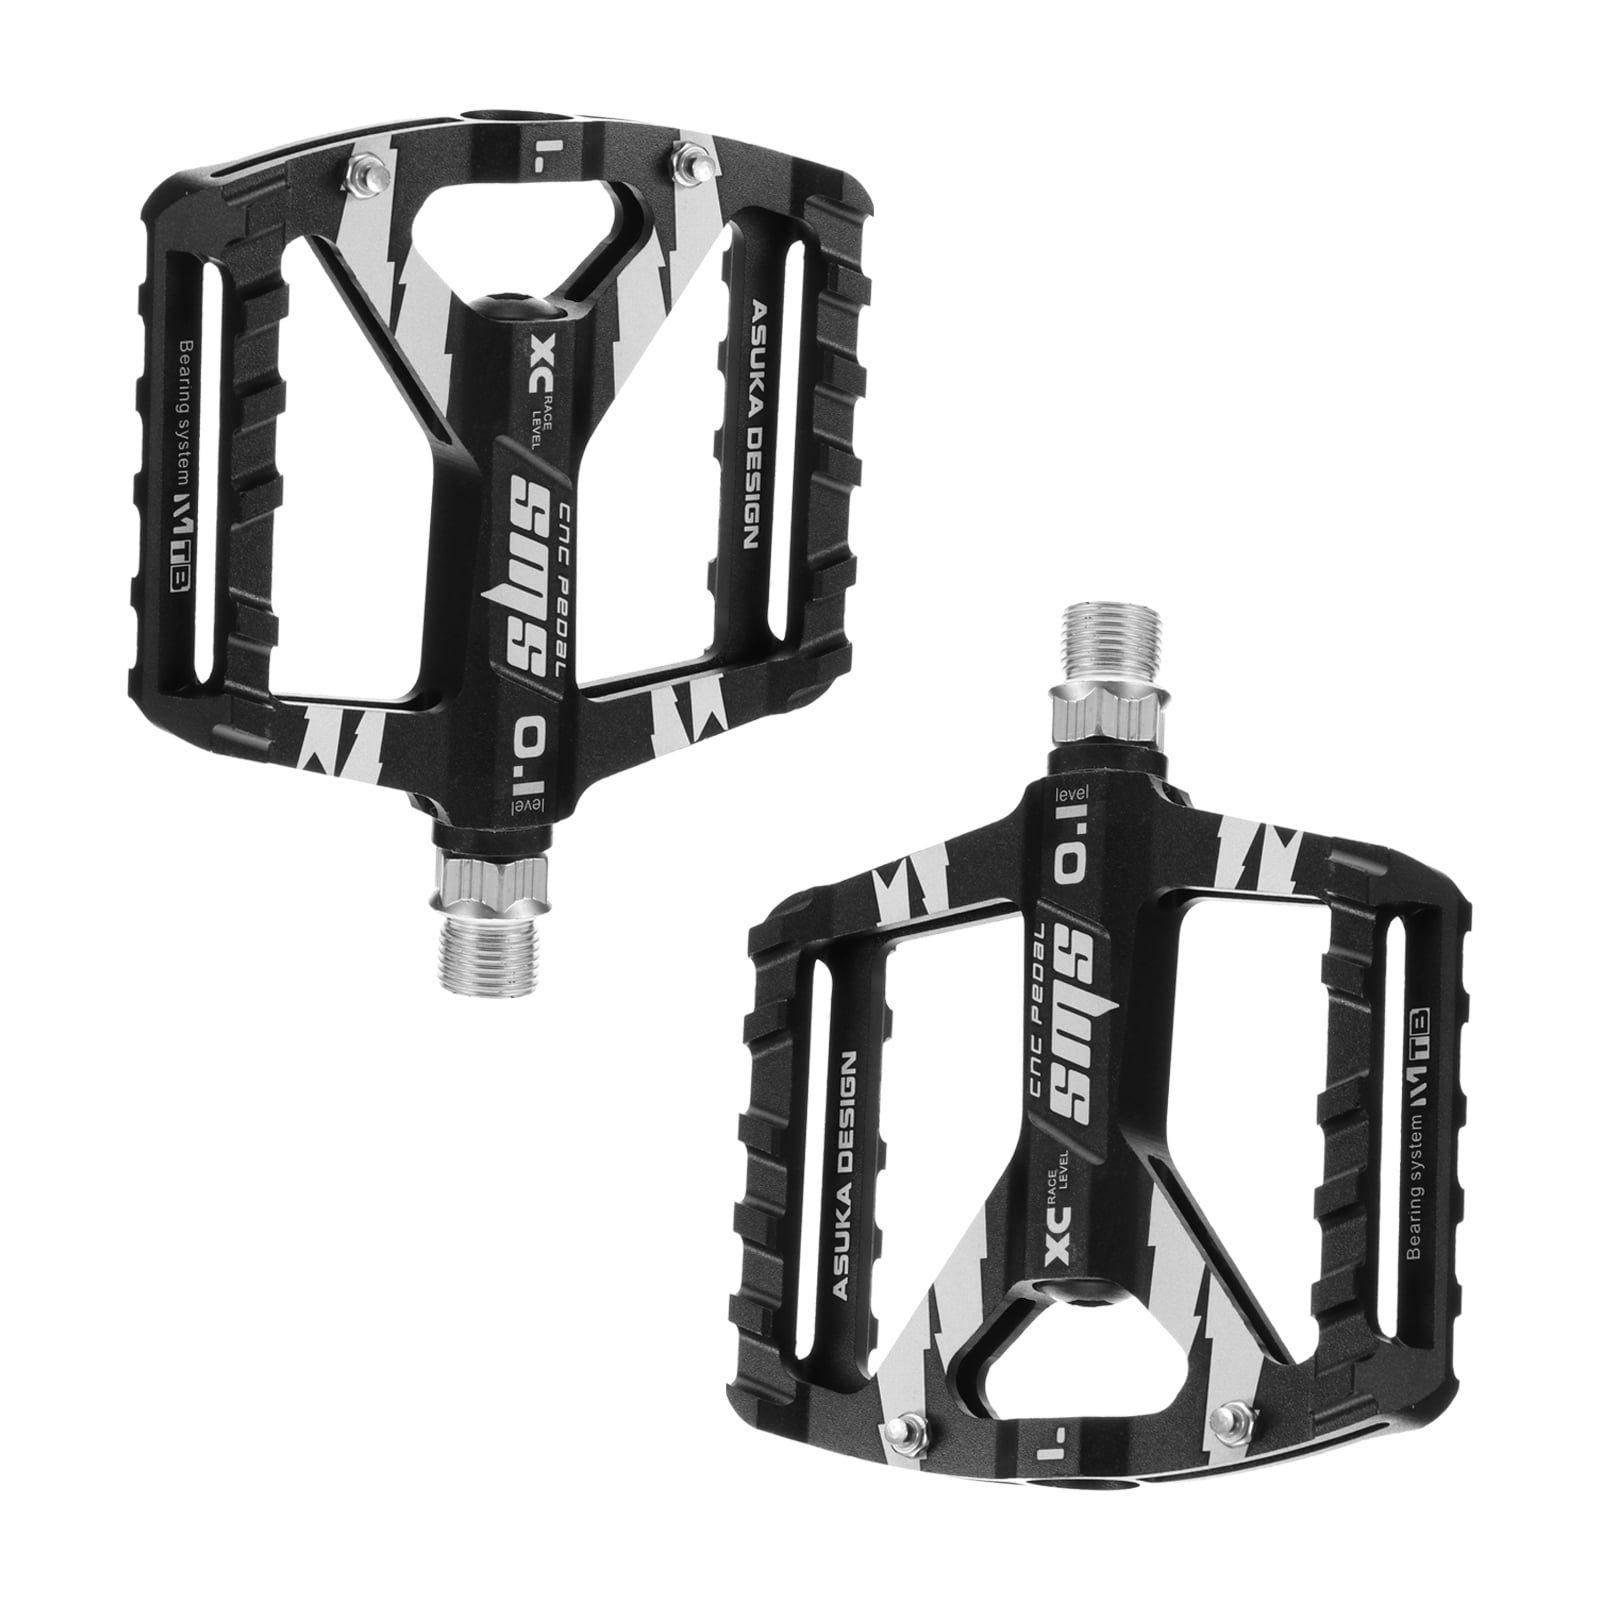 Ultra Light Pedals Anti-Skid For MTB Mountain Bike Road Bicycle Aluminum Alloy 